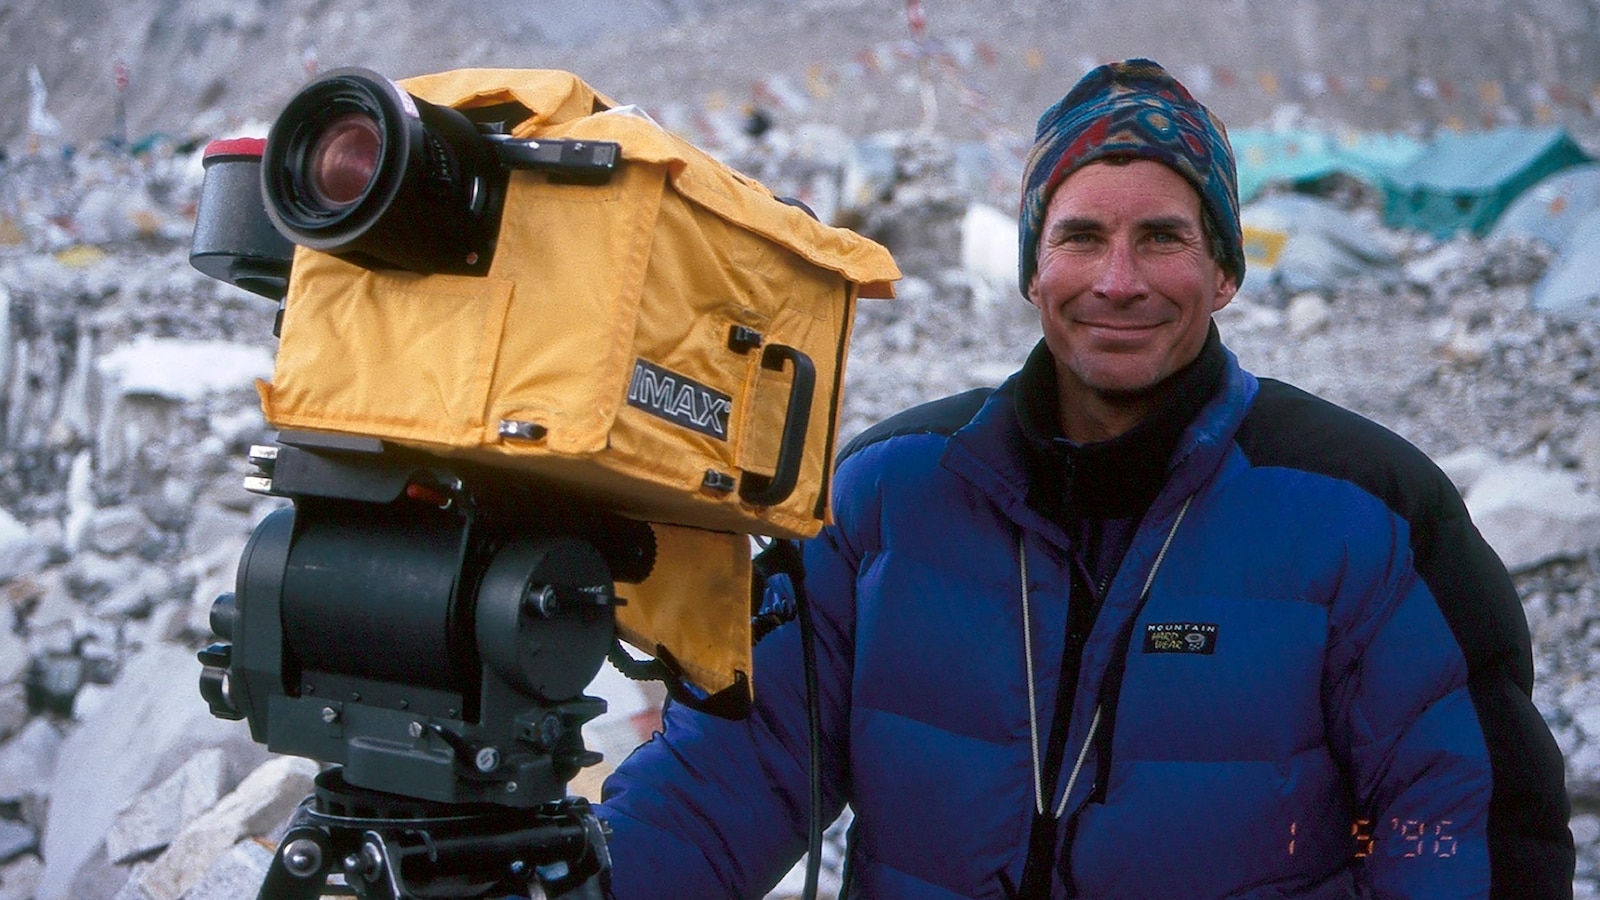 Mountaineer and Co-Producer of Mount Everest Documentary, David Breashears, Passes Away at Age 68